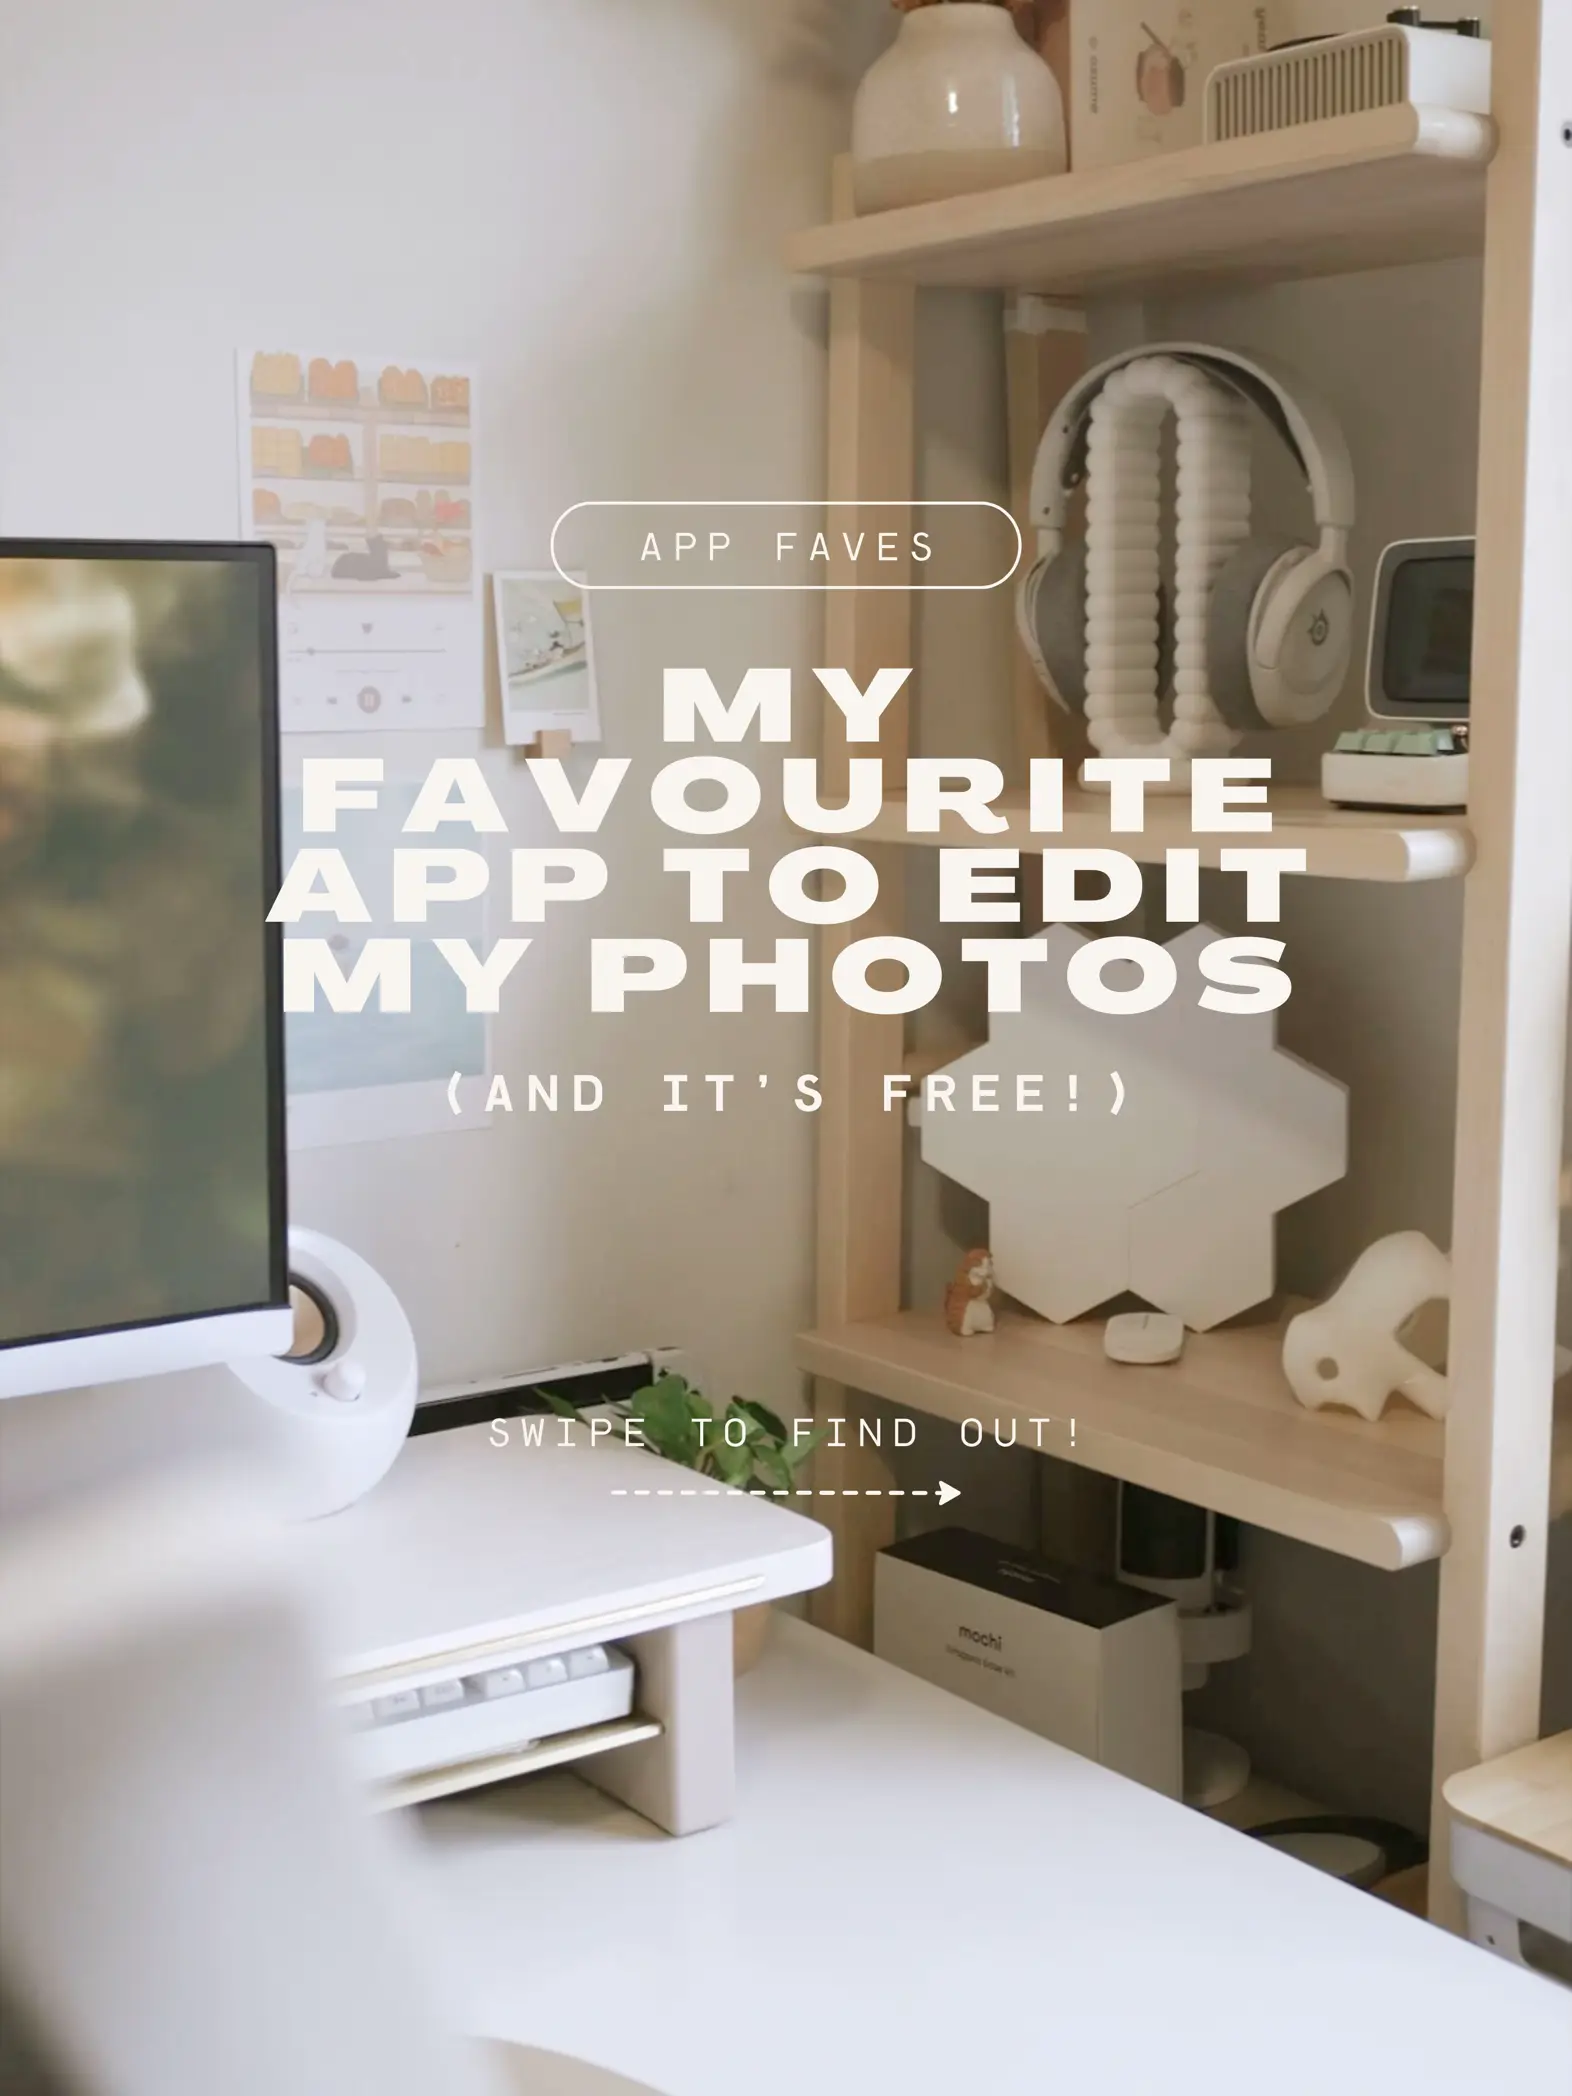 My Favourite App to Edit My Photos!'s images